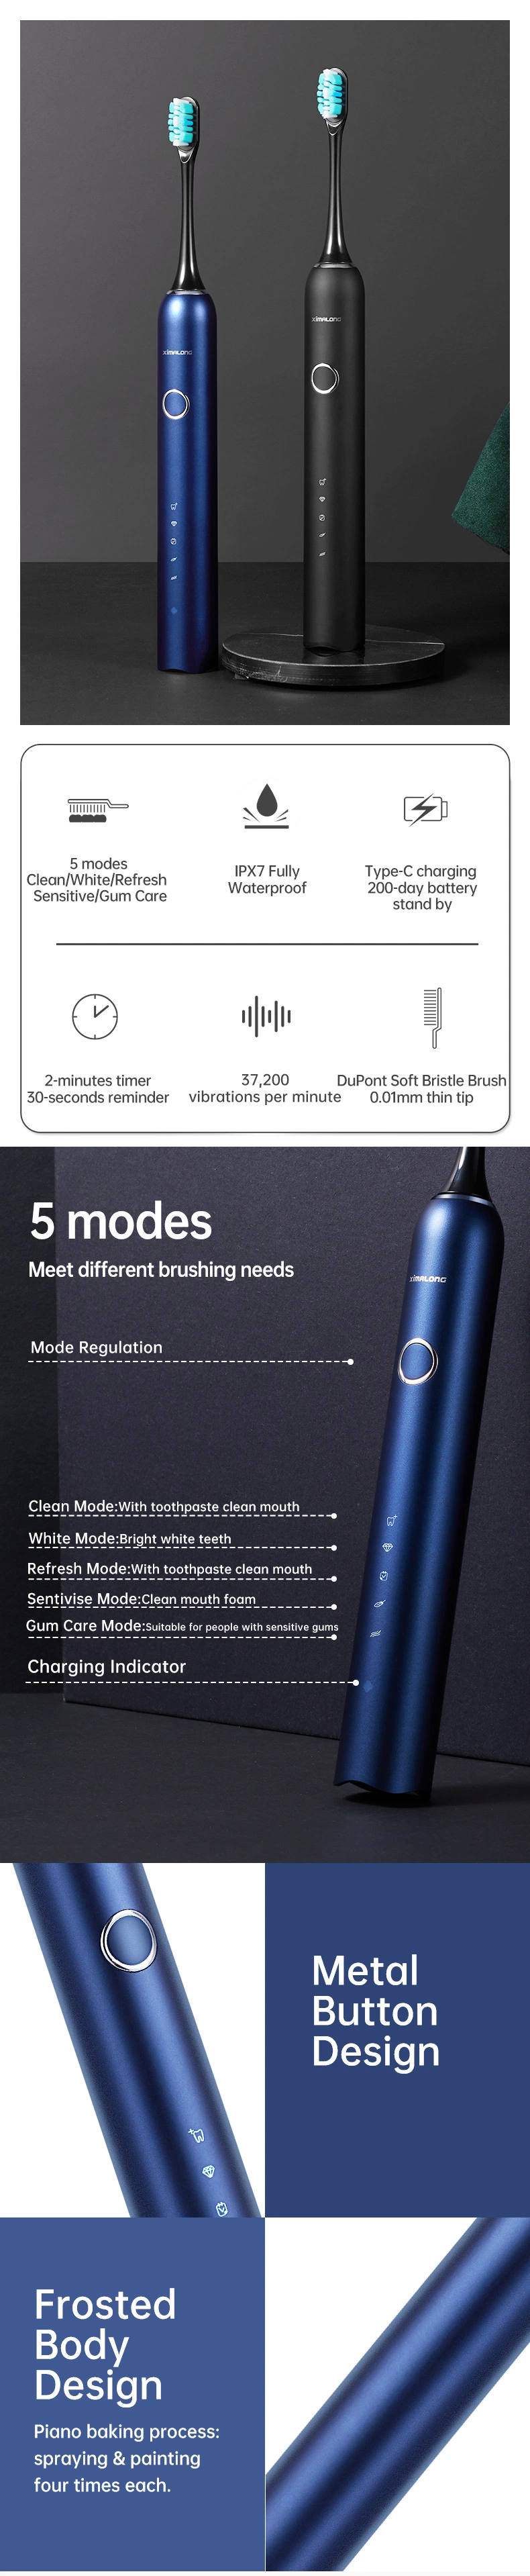 200 Days Standby Time Waterproof Ipx7 Rechargeable Sonic Electric Toothbrush with 5 Modes